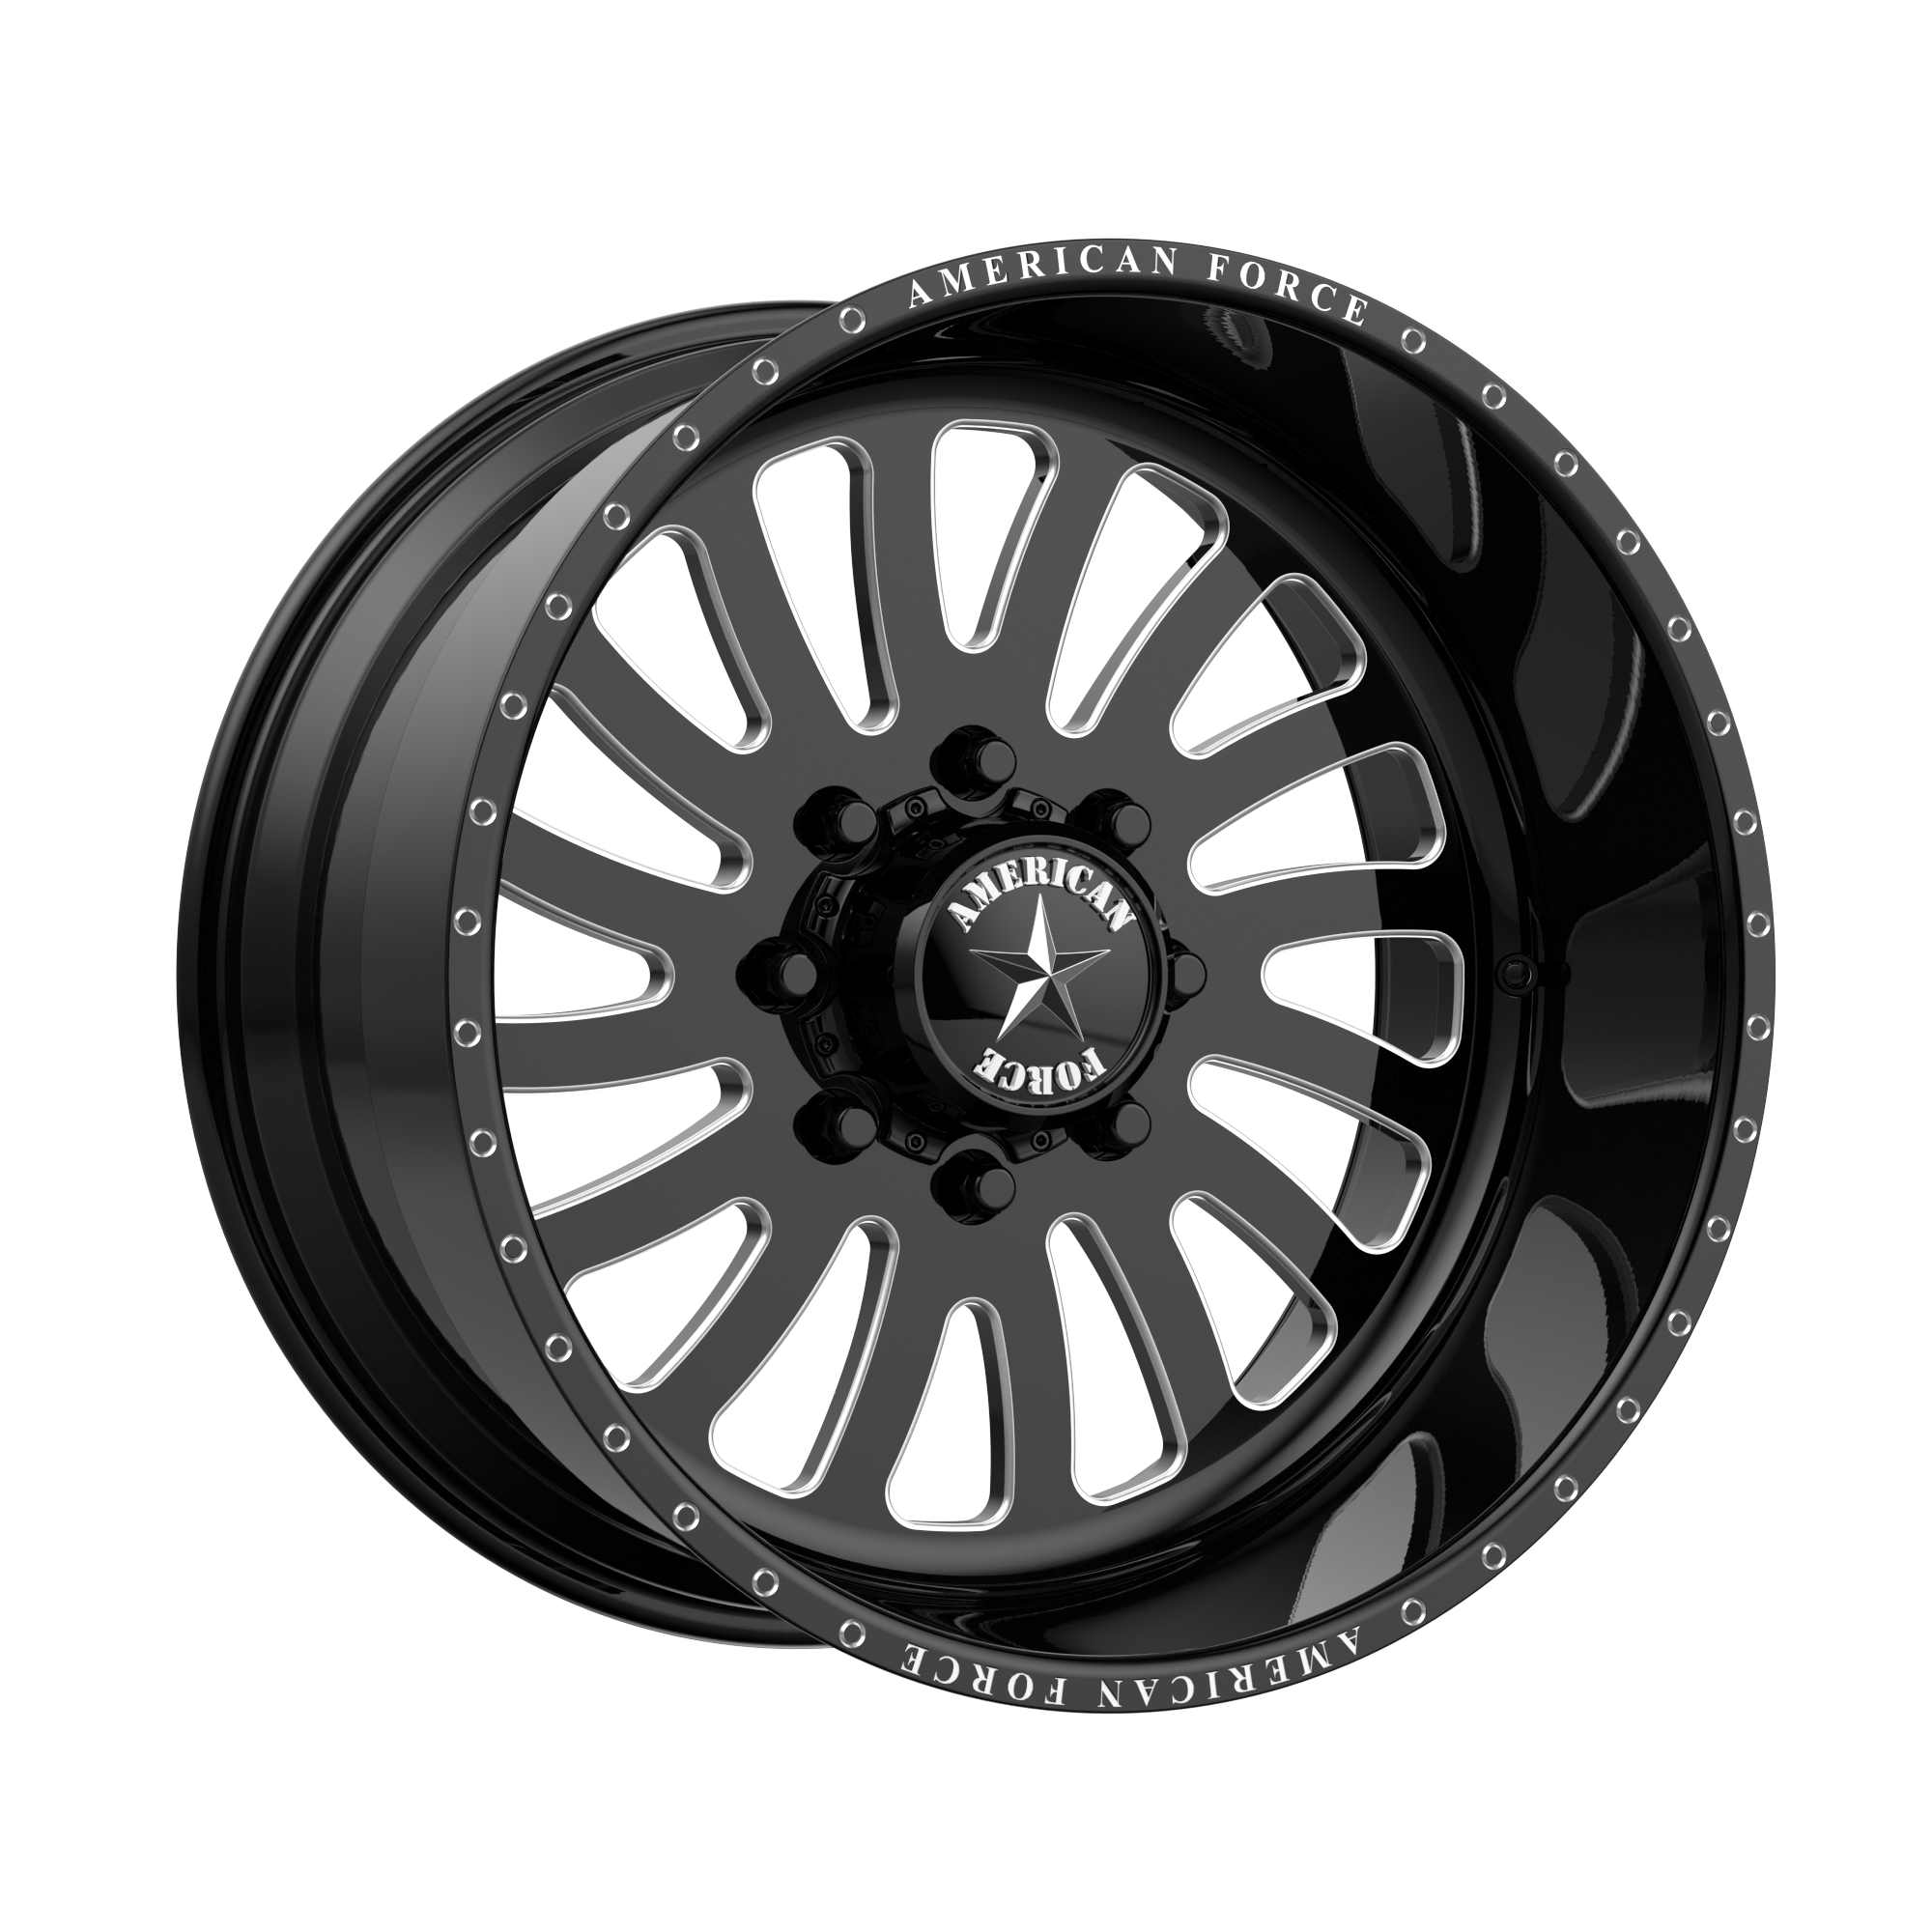 OCTANE SS 20x9 6x135.00 GLOSS BLACK MACHINED (0 mm) - Tires and Engine Performance